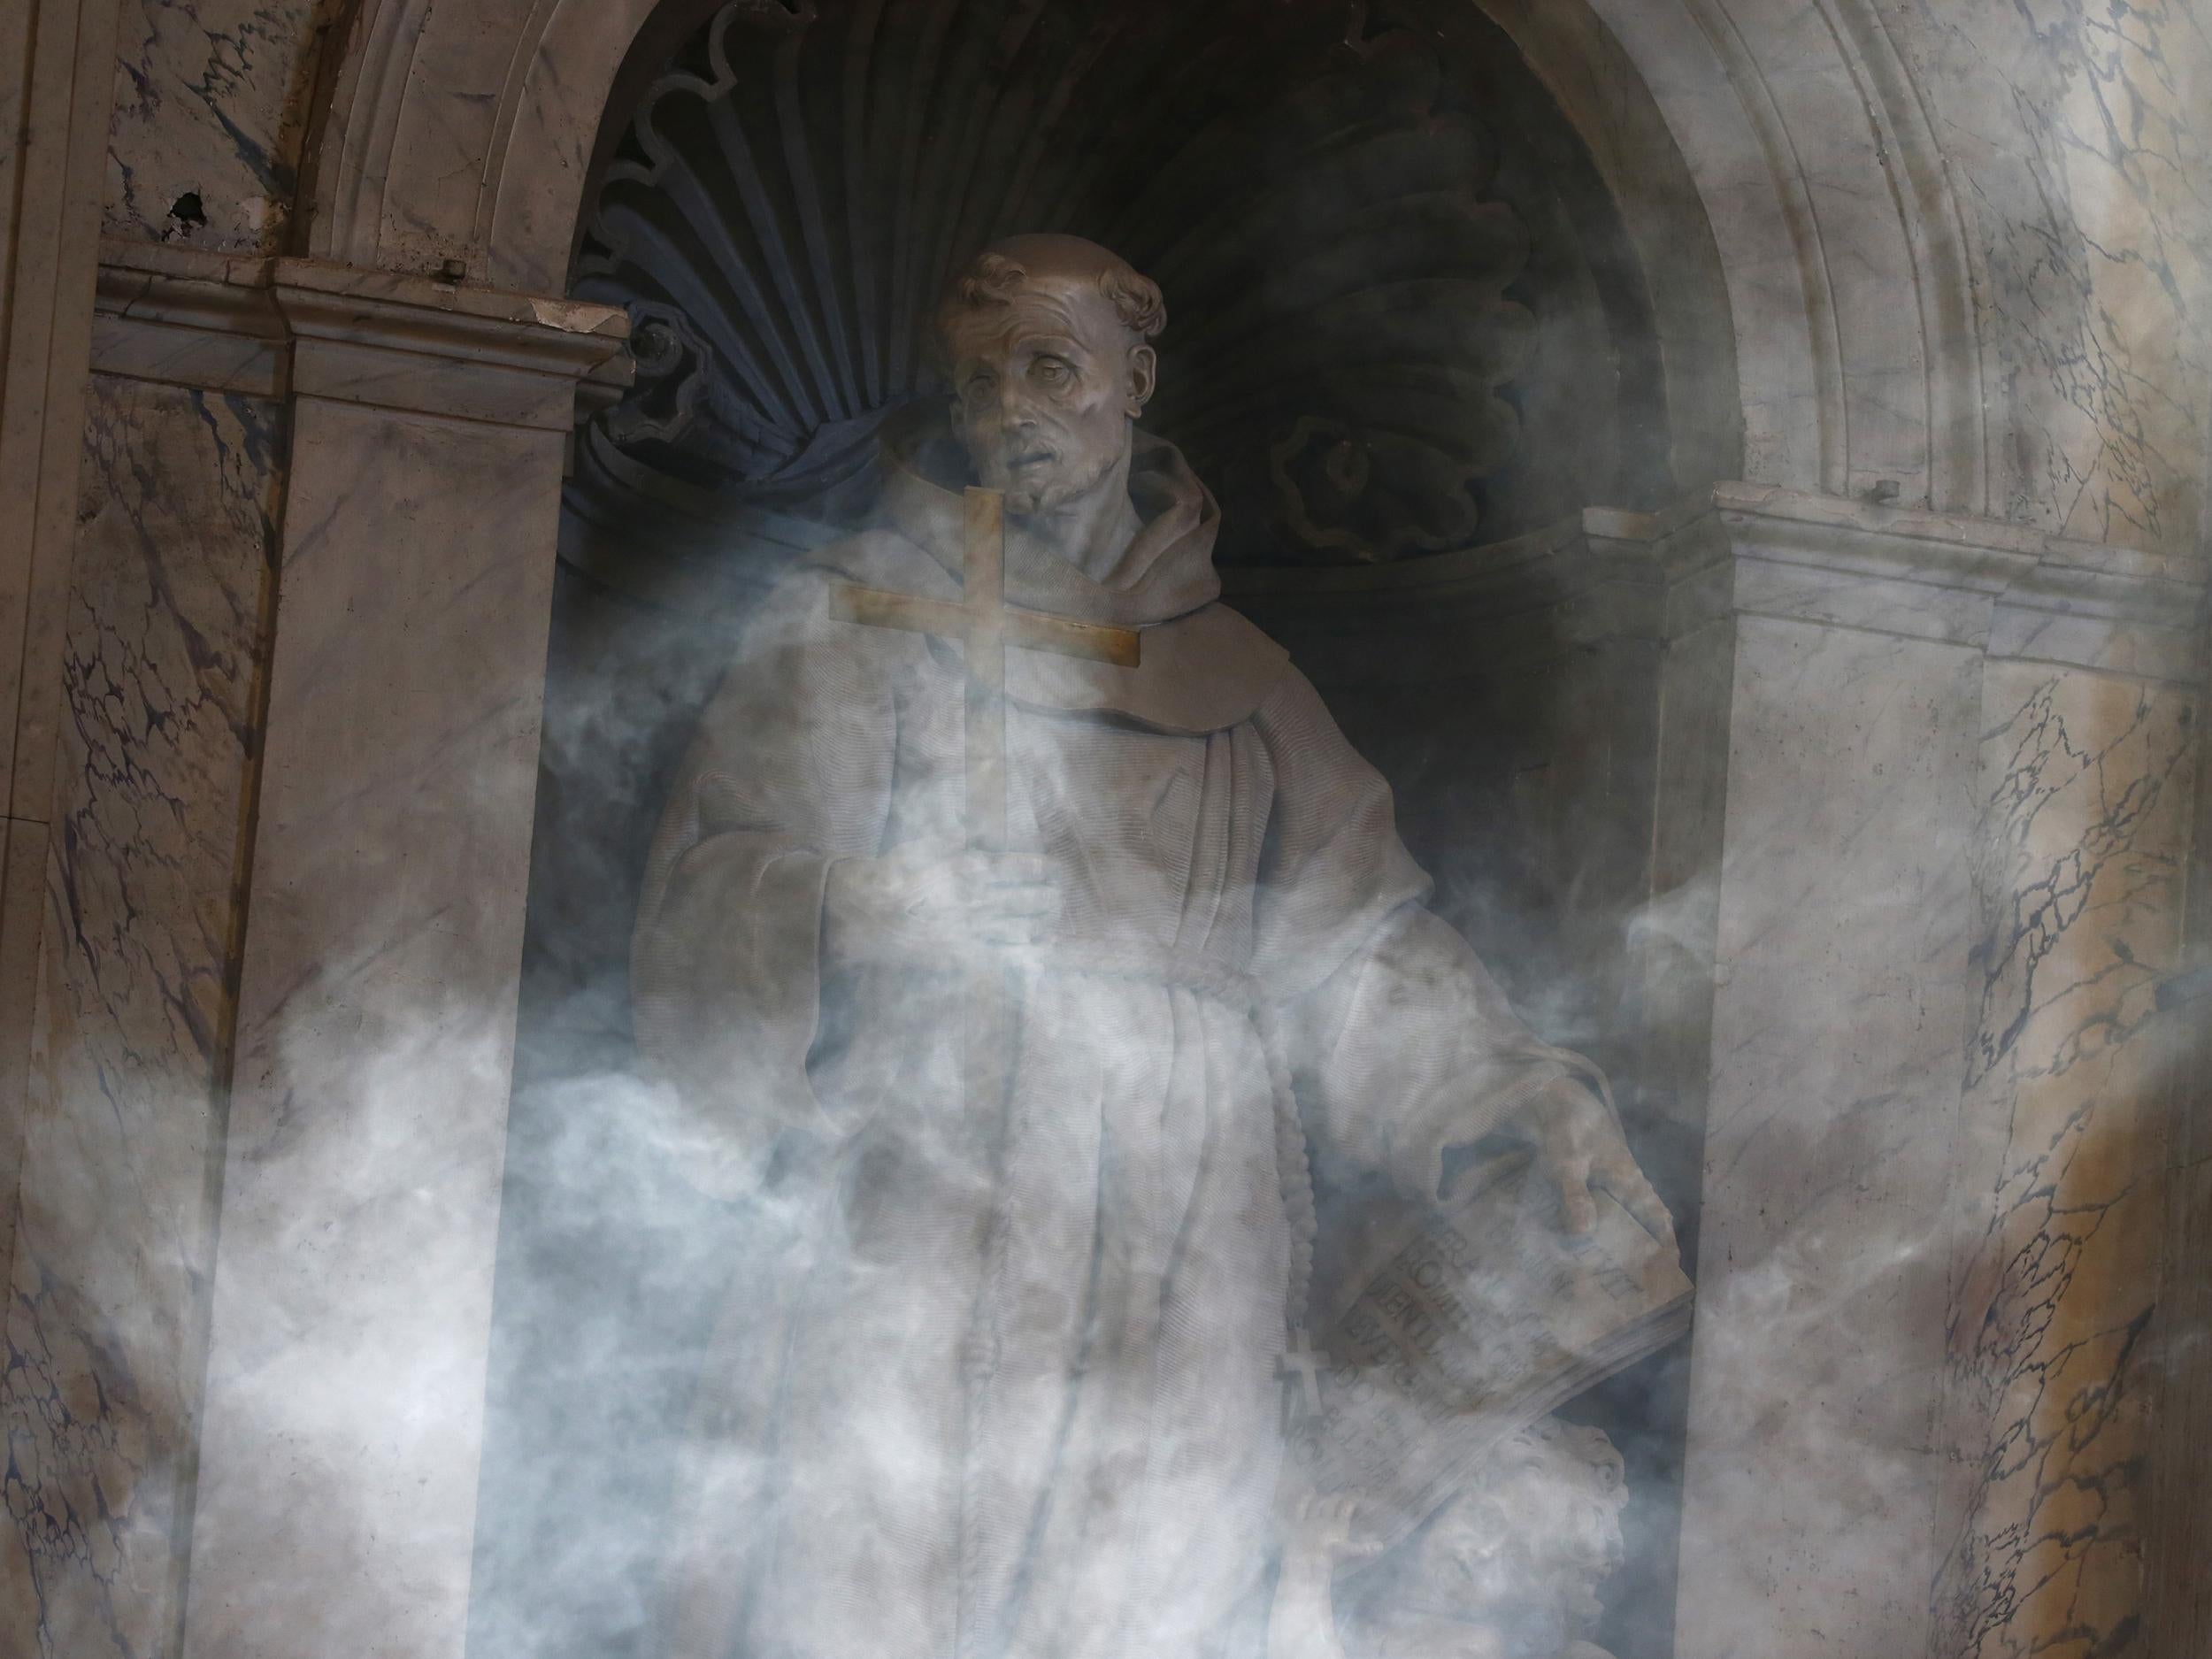 A statue is shrouded in smoke at Saint Peter's Basilica